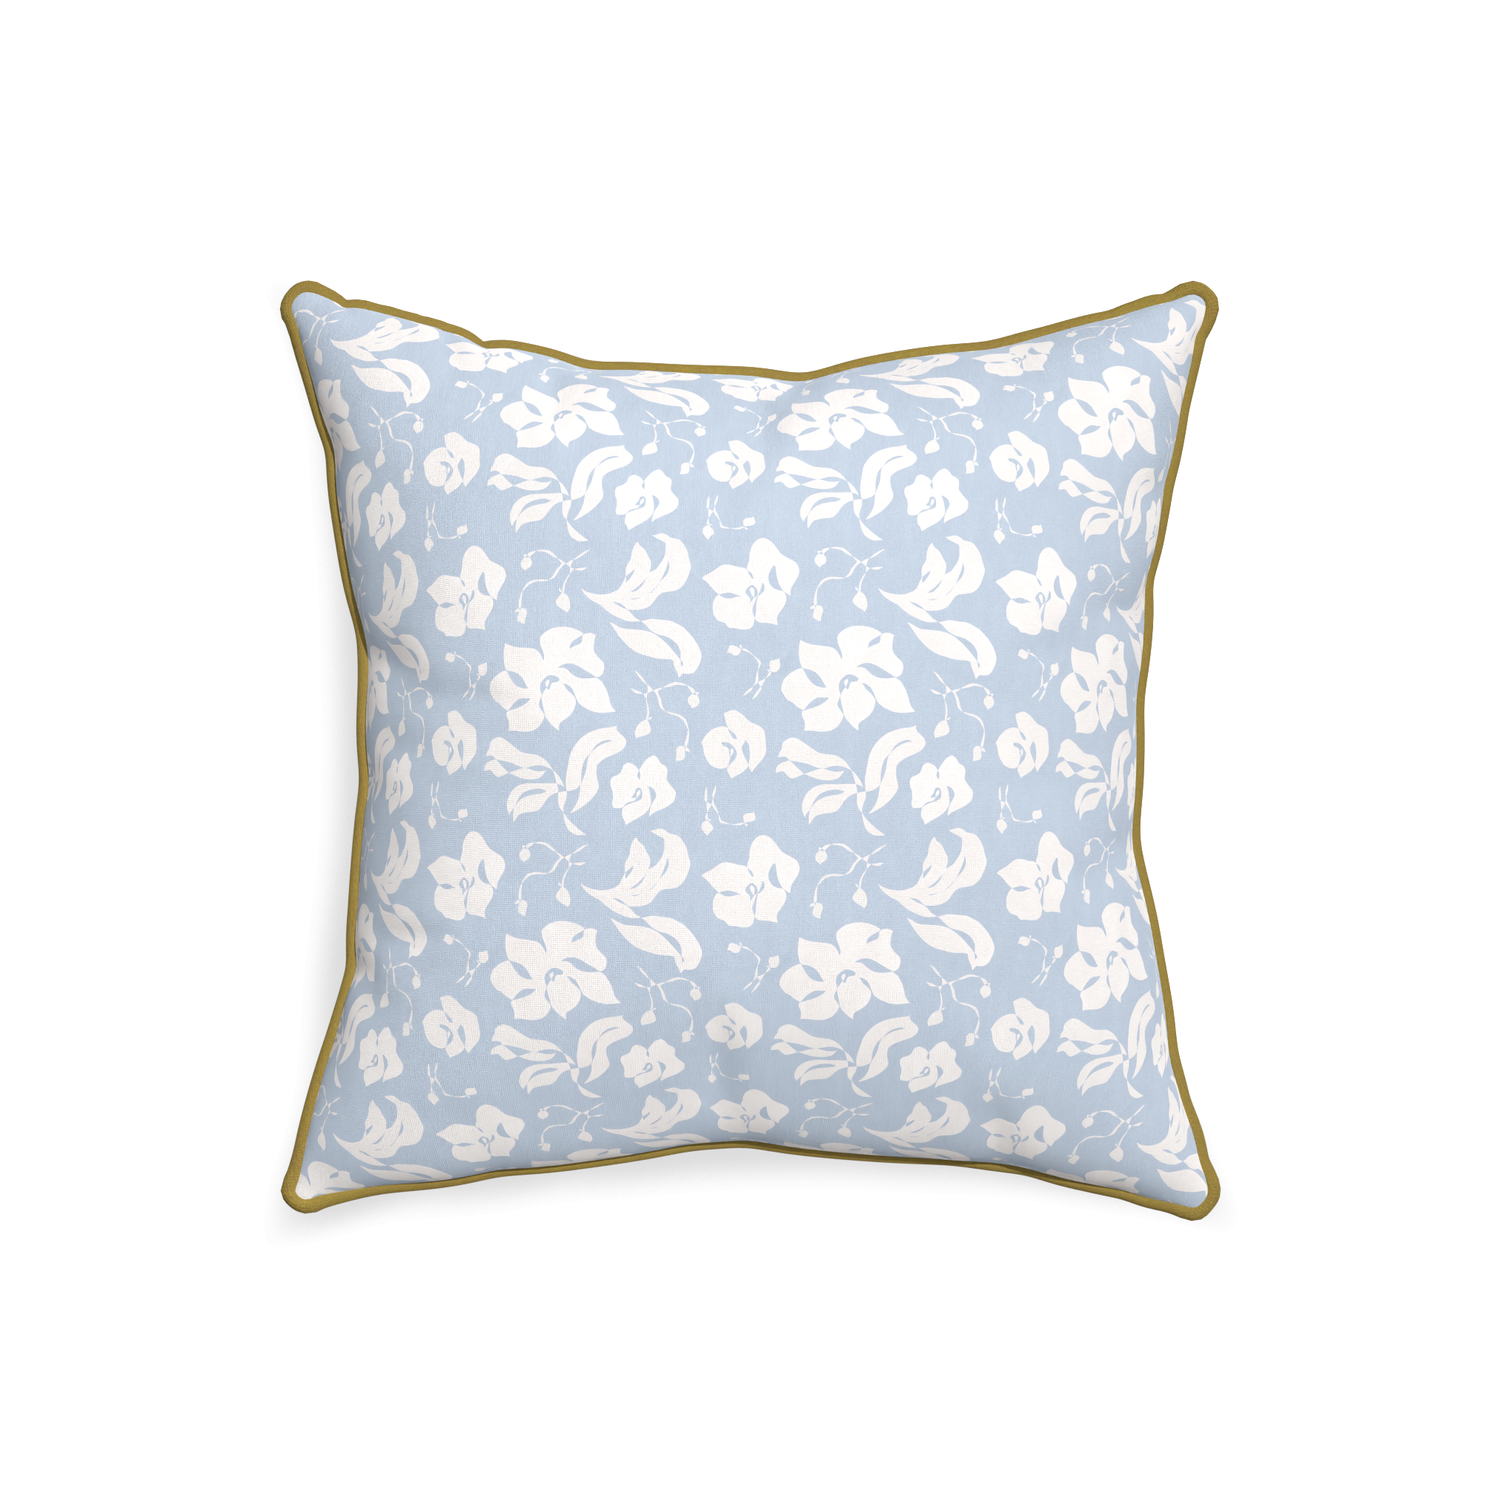 20-square georgia custom cornflower blue floralpillow with c piping on white background